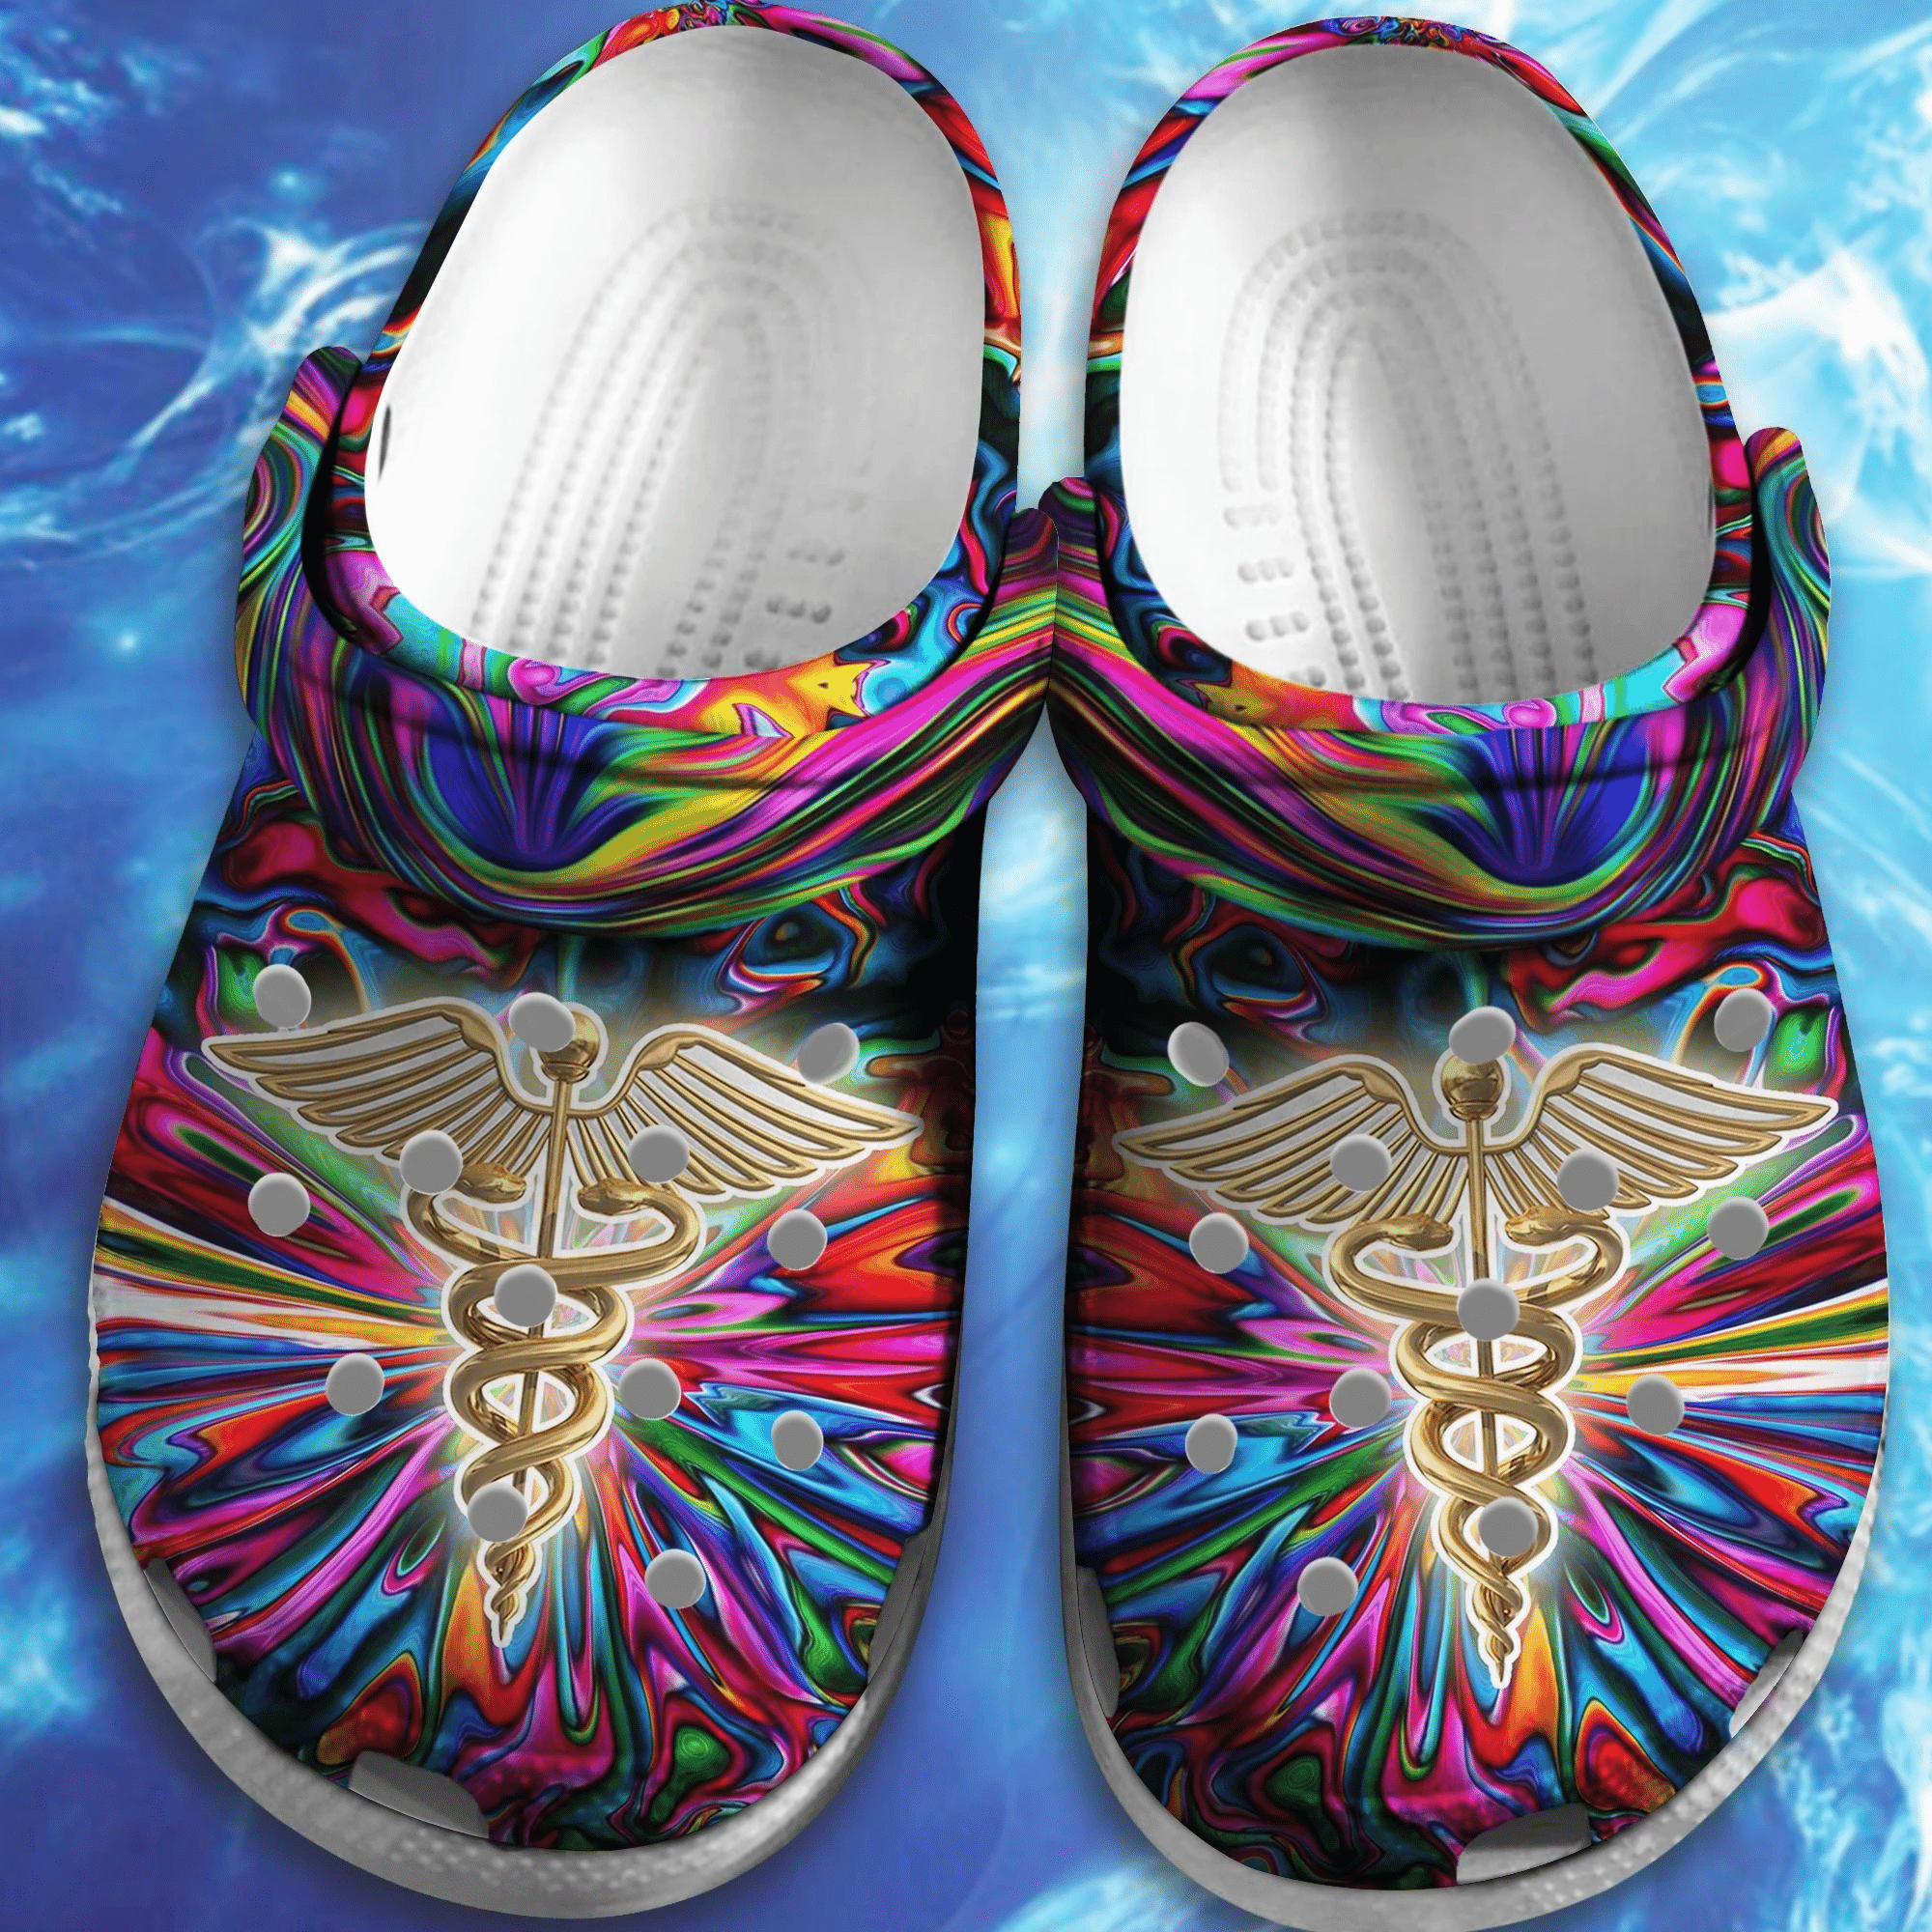 Nurse Hippie Trippy Psychedelic Clog Shoes bland Birthday Gift For Man Woman Friend Product Photo 1 Product photo 1